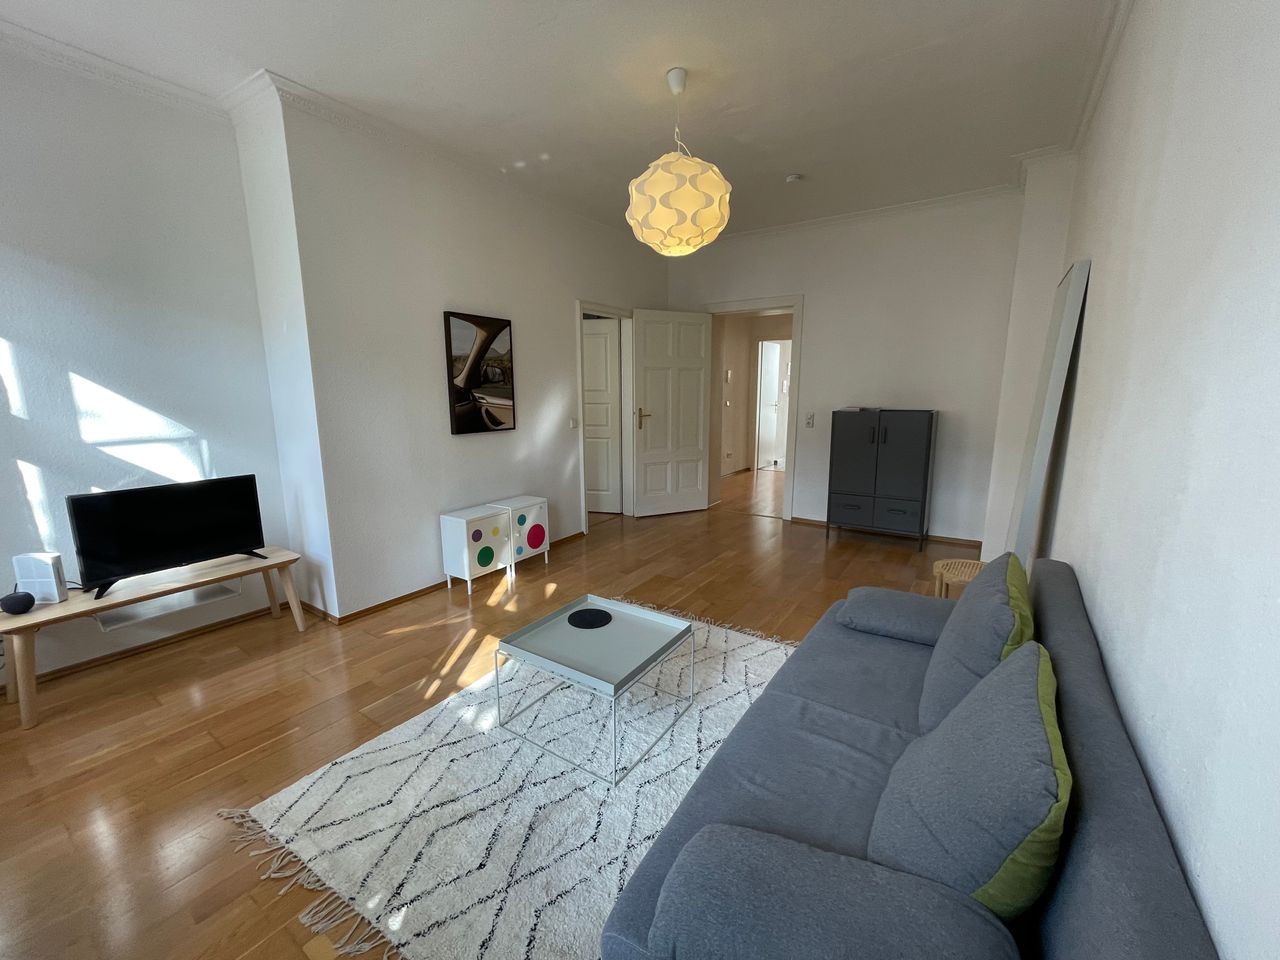 Top Location Zionskirchplatz/Mitte, Cosy bright apartment with balcony and elevator